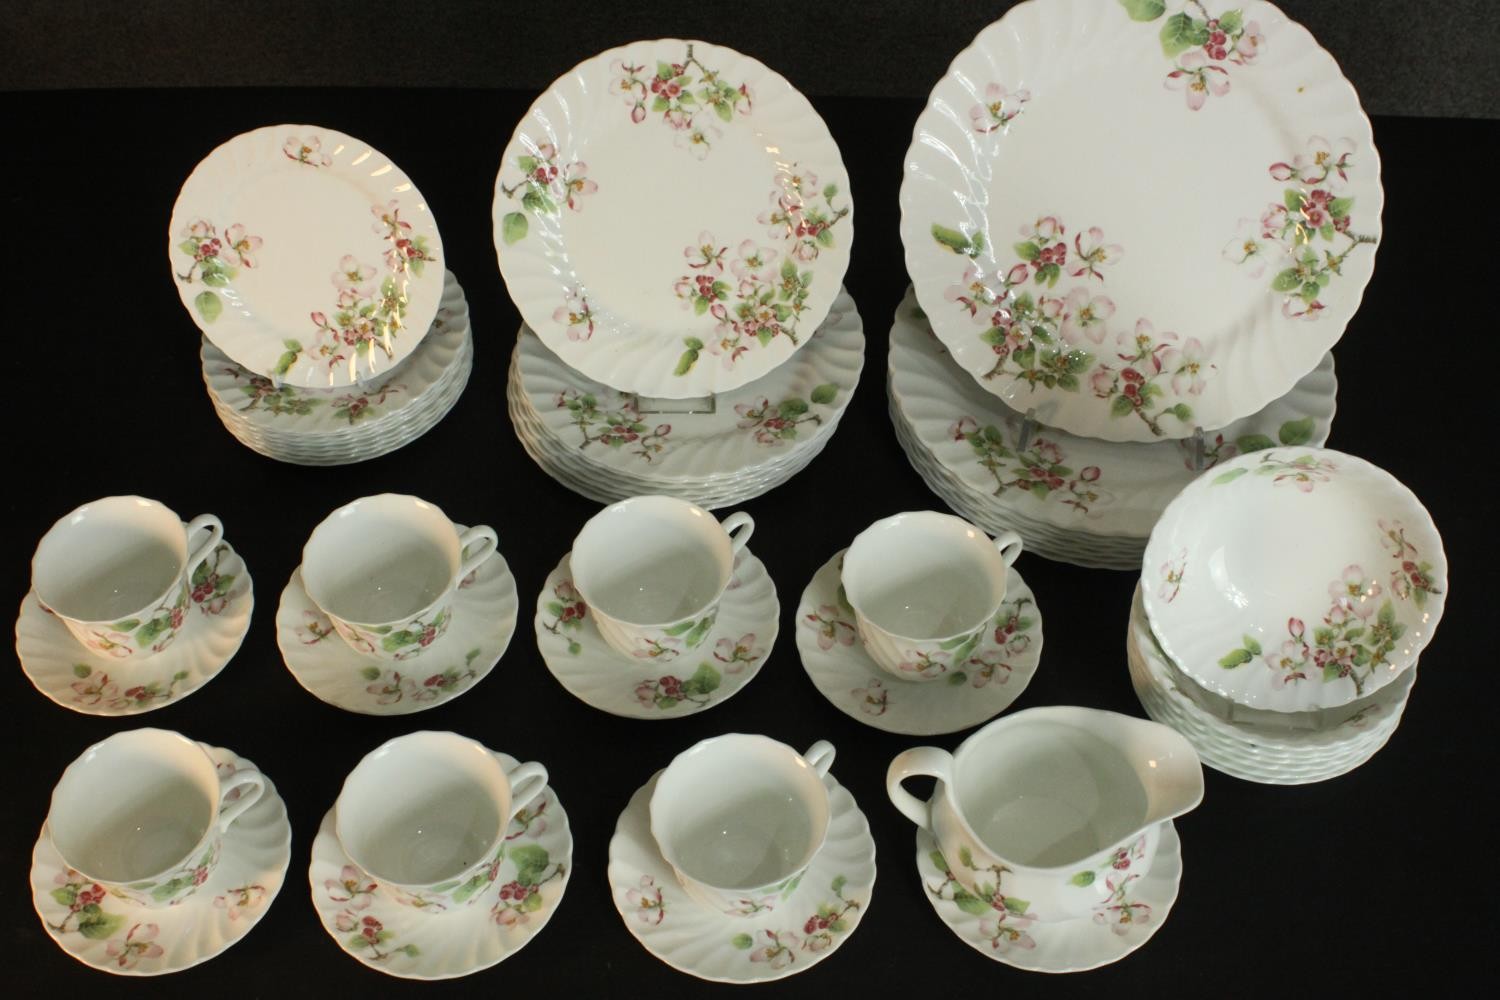 A 20th century Wedgwood Apple Blossom dinner and tea set (one cup missing) 47pieces. Largest piece - Image 5 of 14